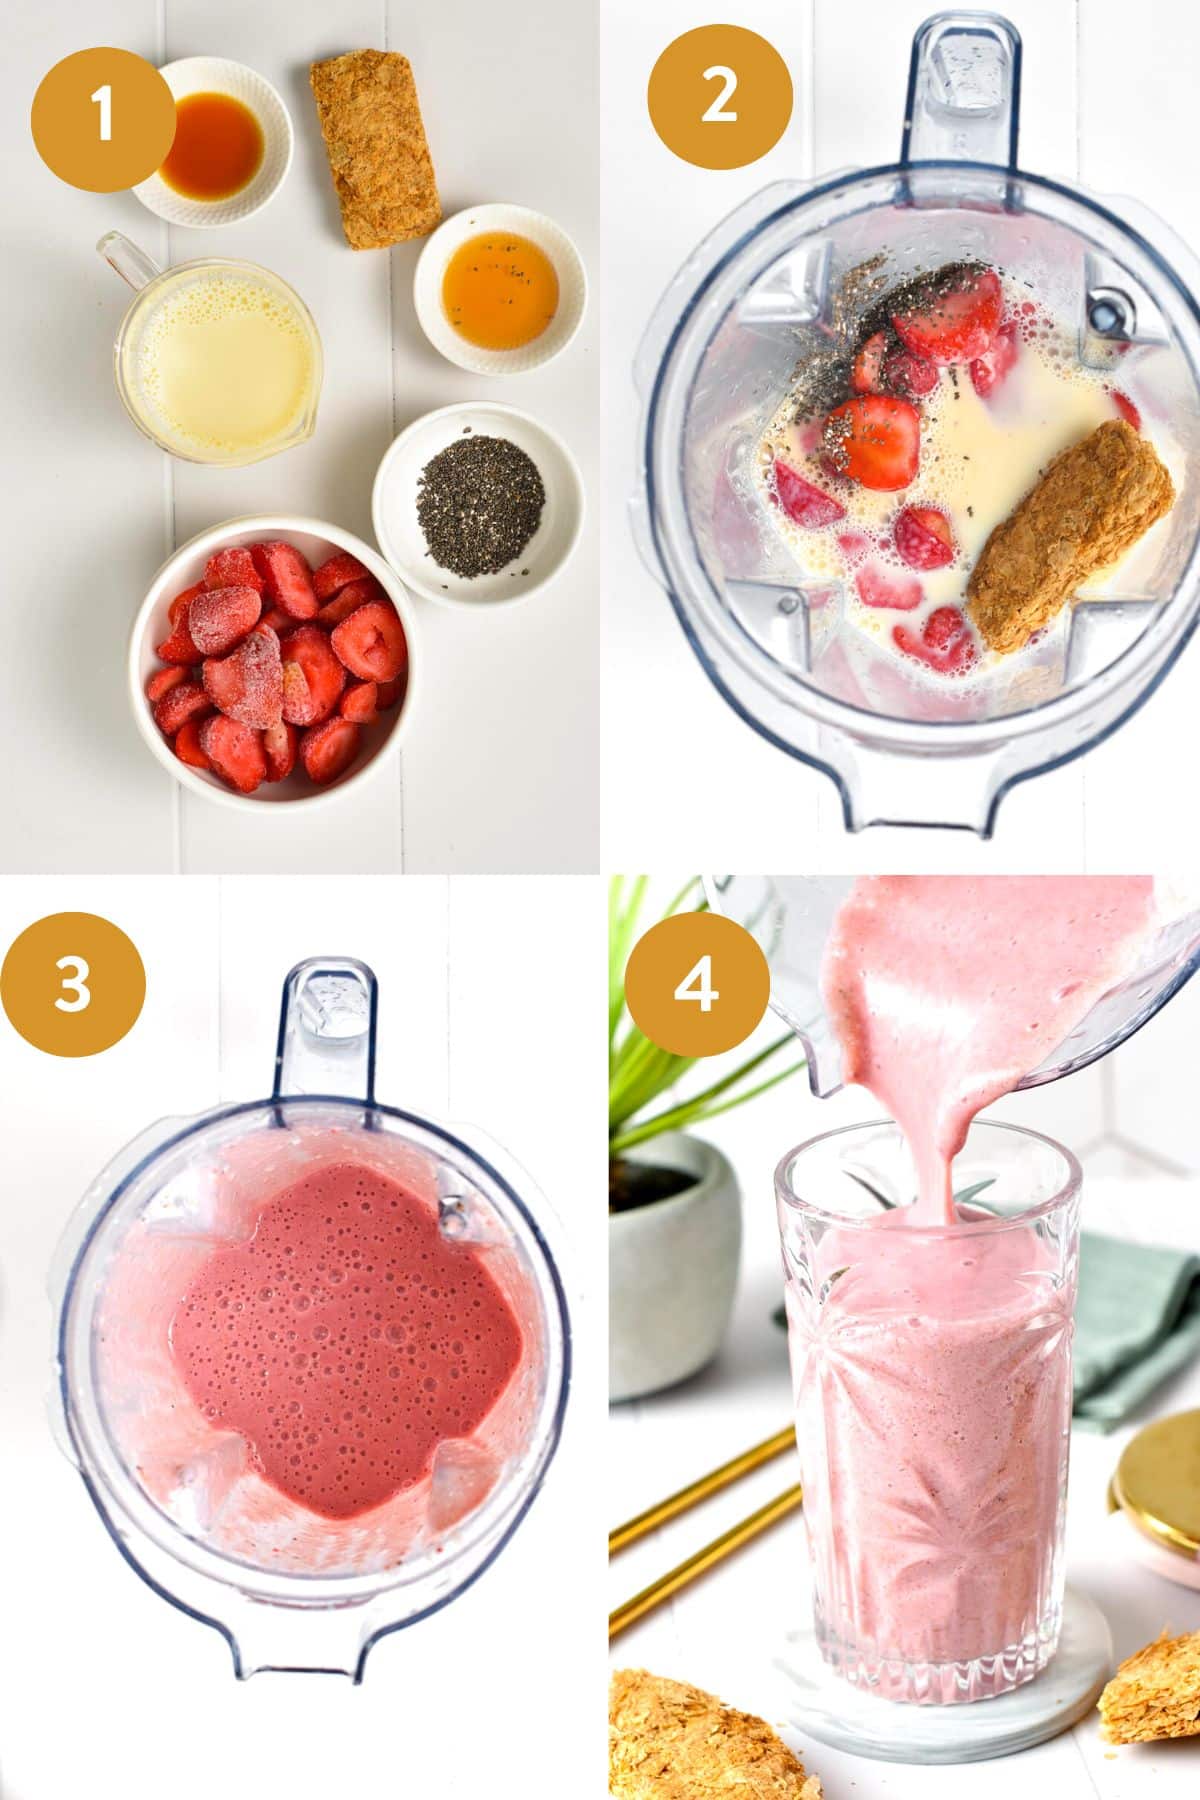 This WeetBix Smoothie is a delicious, thick, and creamy strawberry breakfast smoothie packed with tasty wheat biscuit flavor. It contains all you need to start the day with 8 grams of proteins and 8 grams of fiber to keep you full for hours.